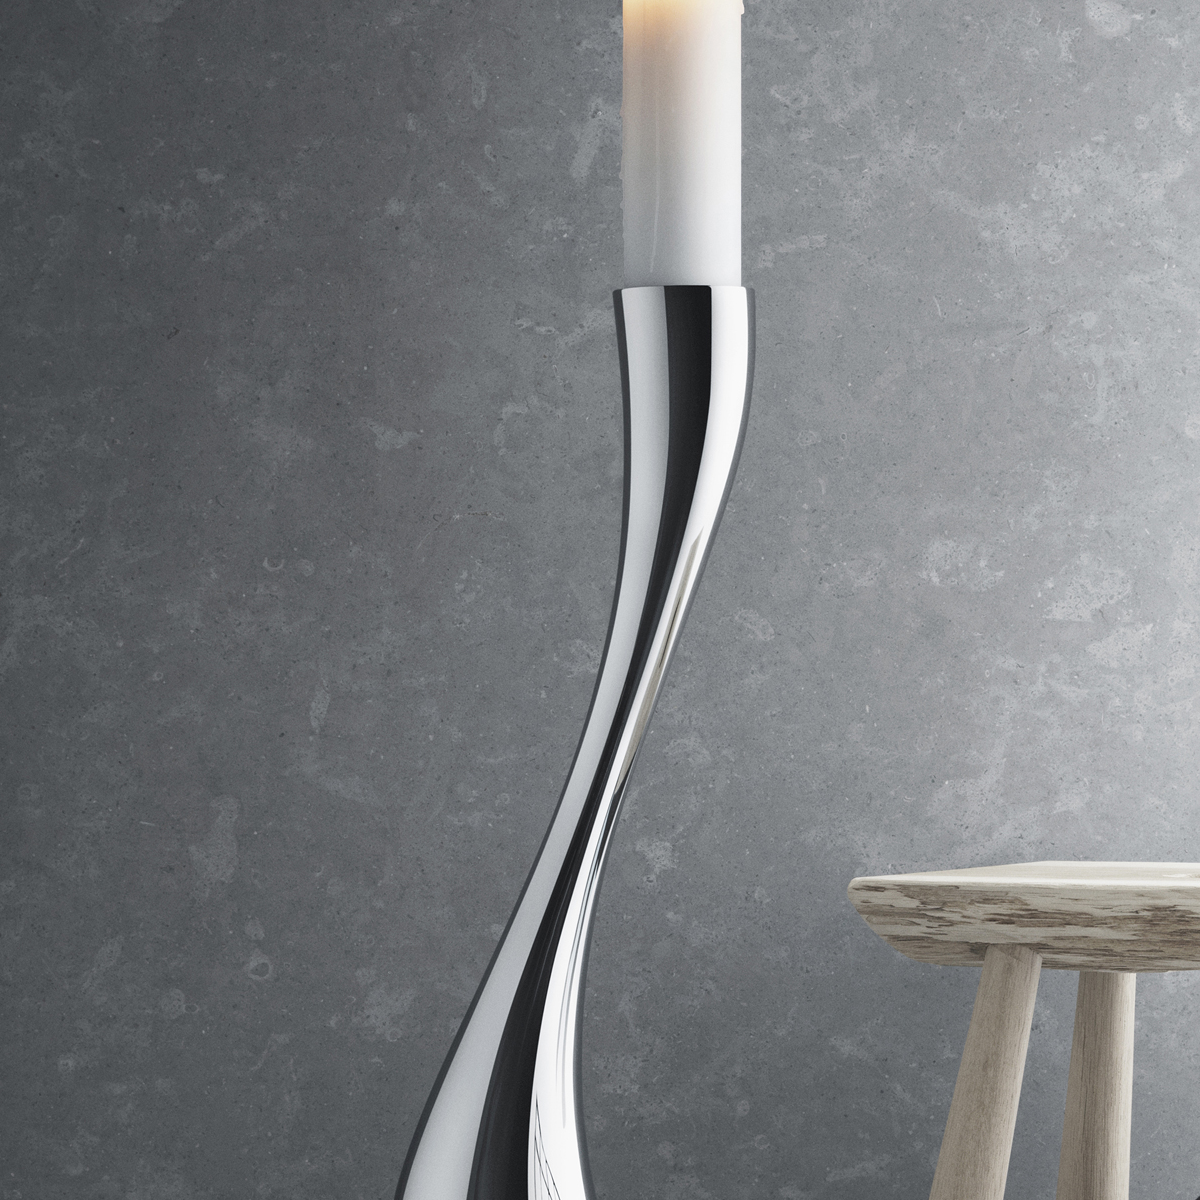 Mirror Polished Stainless Steel by Constantin Wortmann Medium and Large Small Georg Jensen Cobra Candleholder 